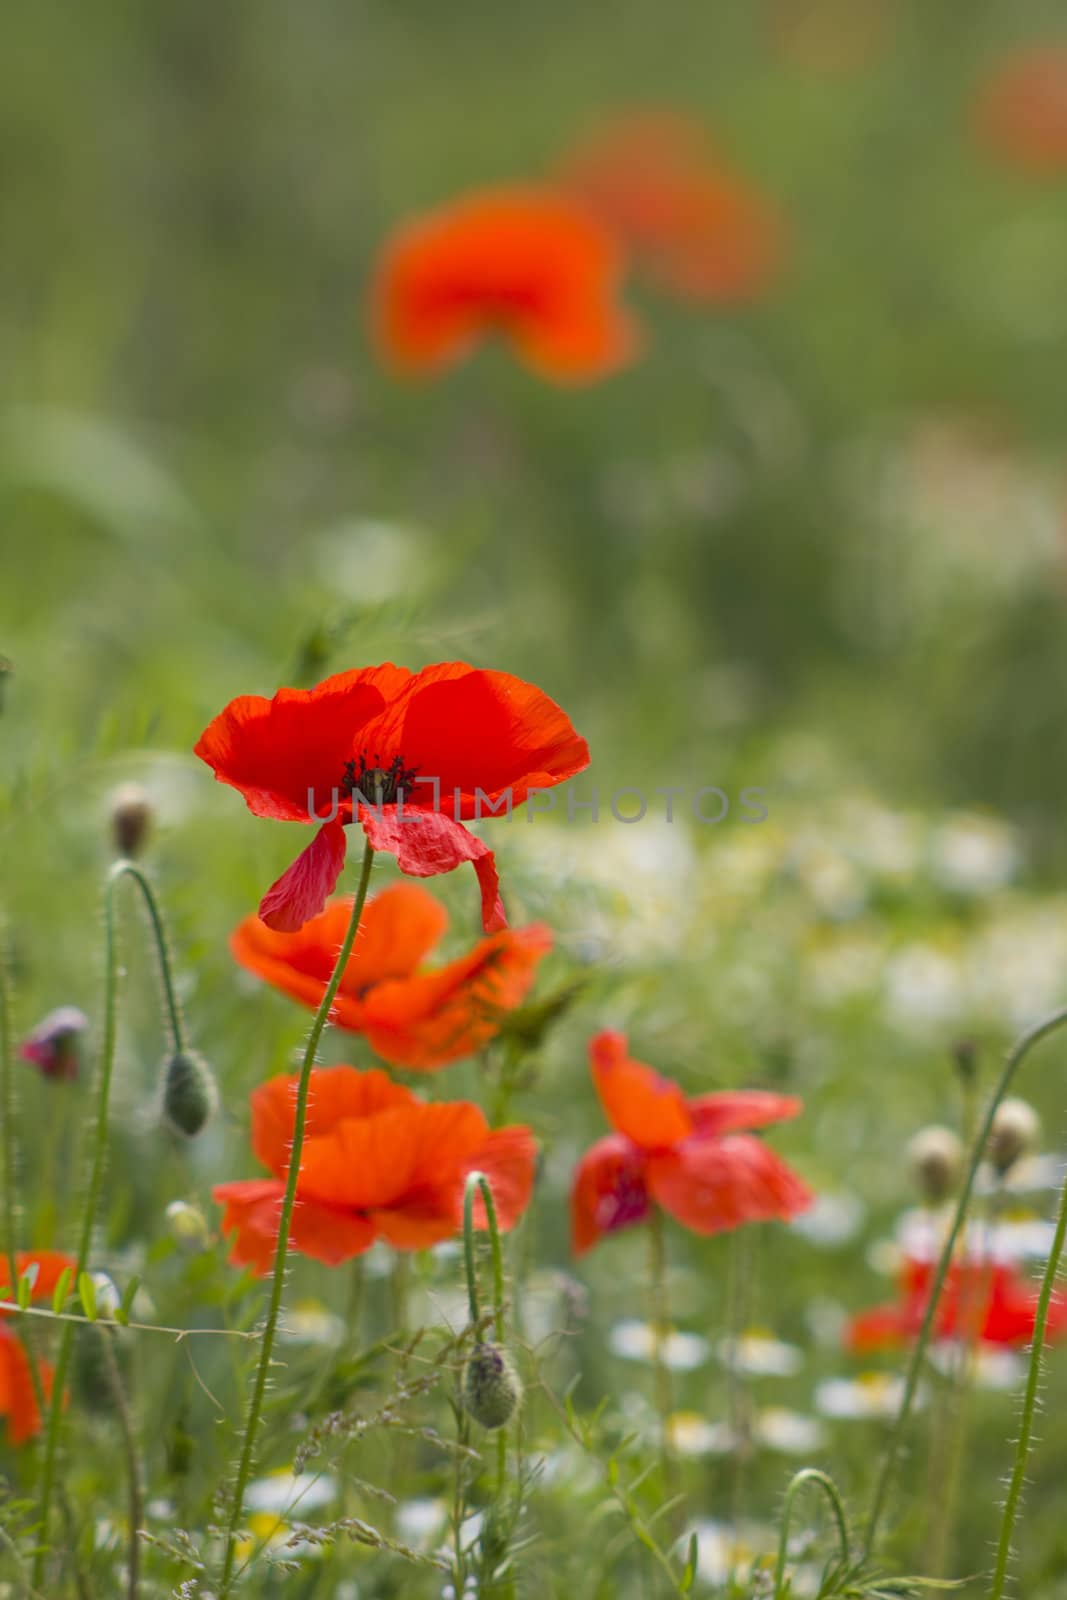 summer field of red poppies by miradrozdowski